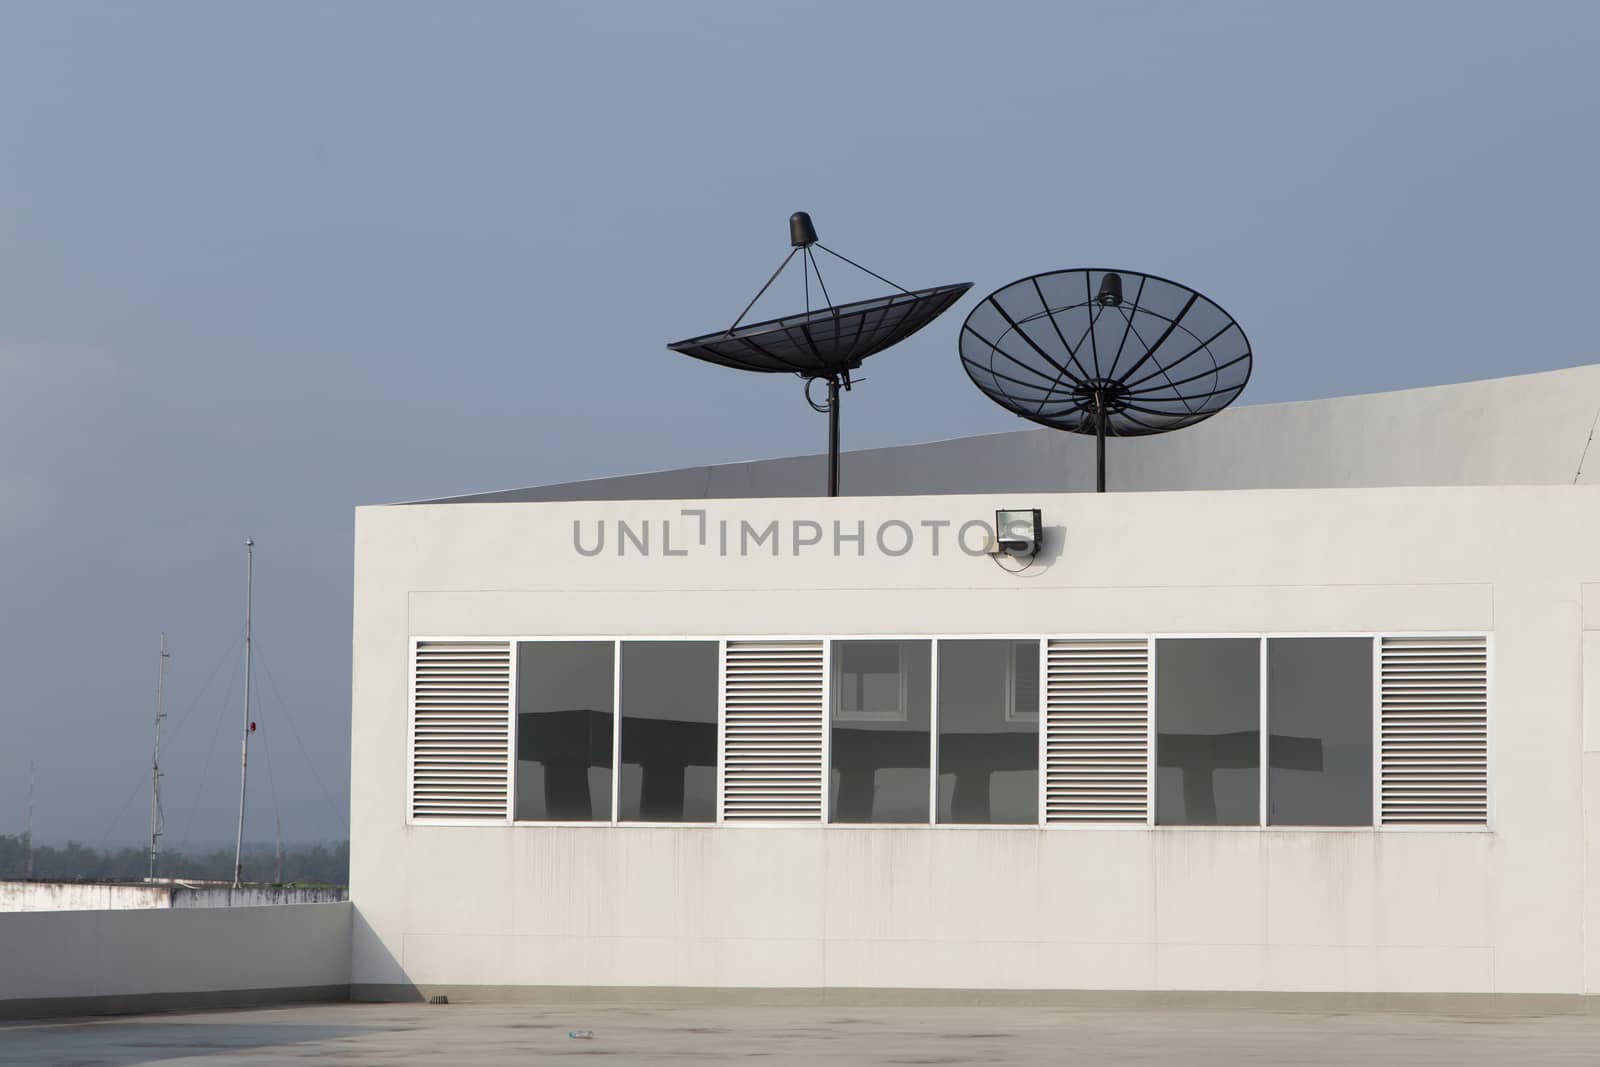 Satellite Disc on rooftop by ngarare